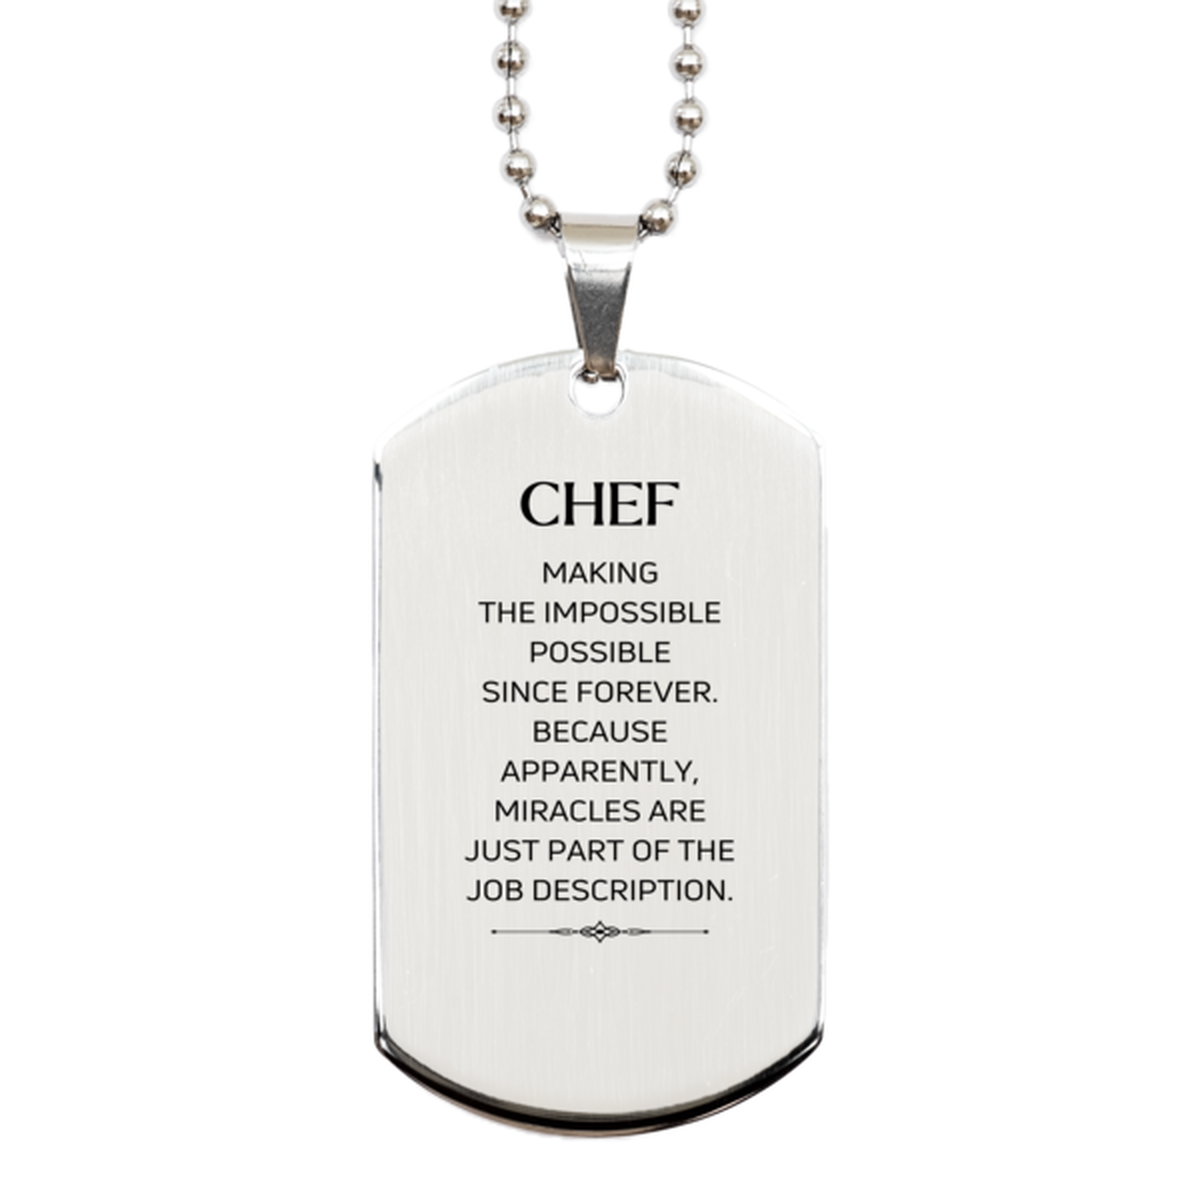 Funny Chef Gifts, Miracles are just part of the job description, Inspirational Birthday Silver Dog Tag For Chef, Men, Women, Coworkers, Friends, Boss